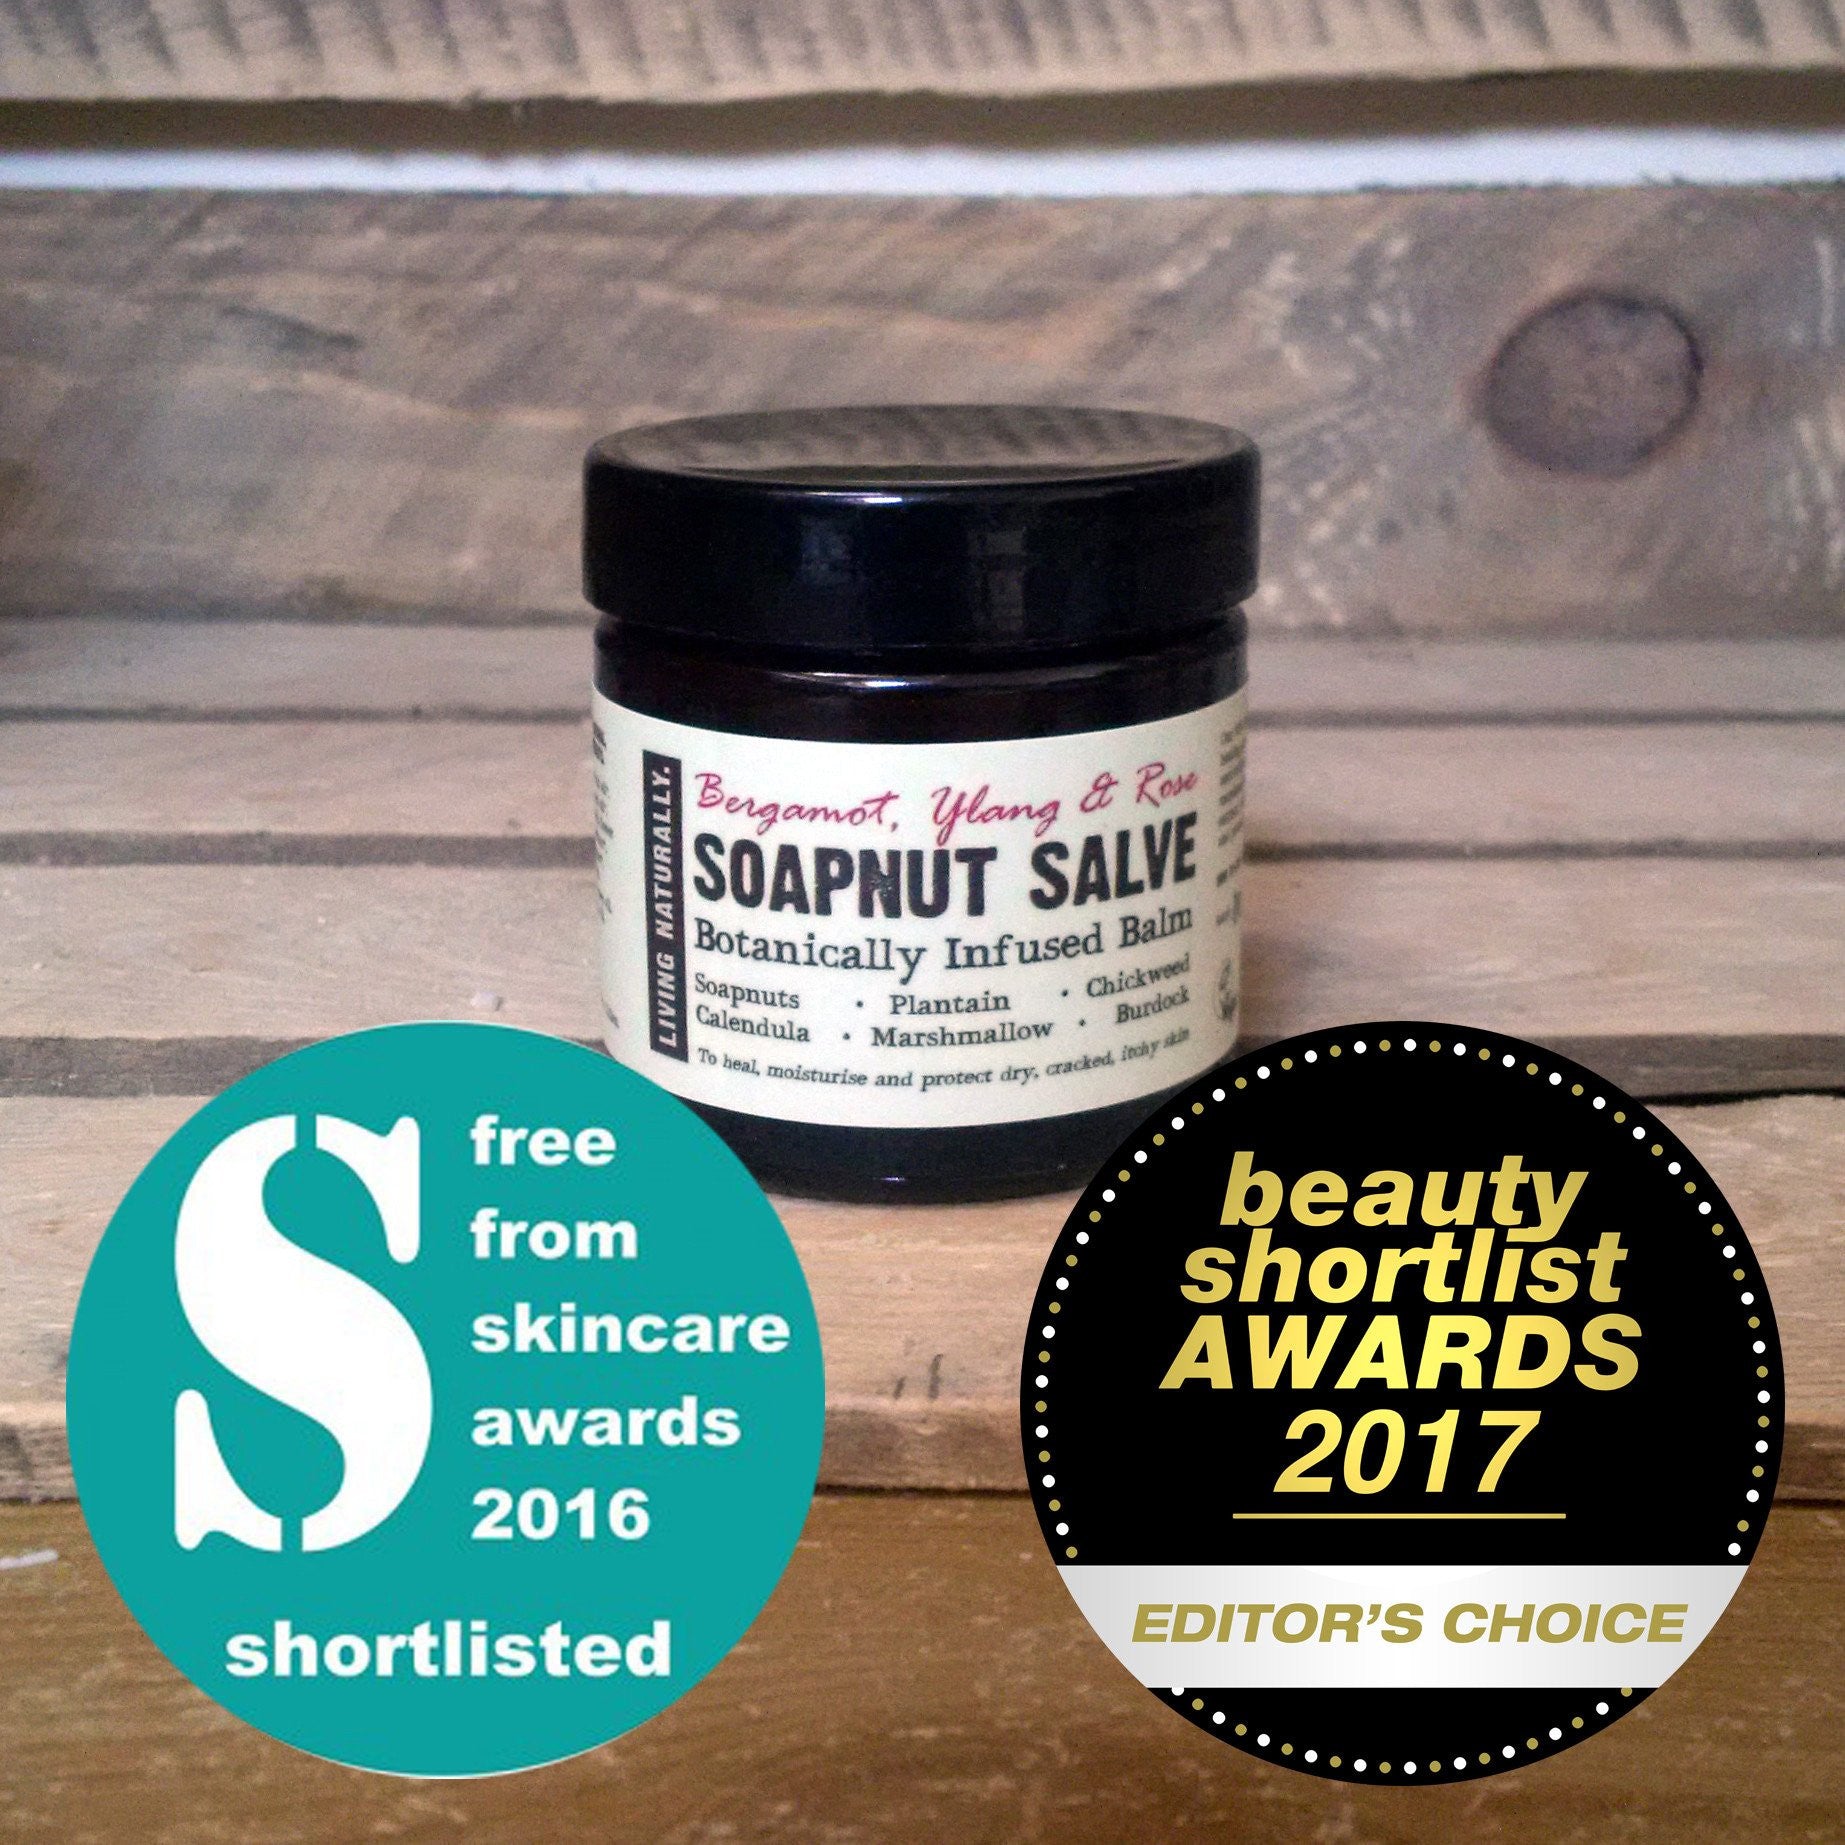 We won Editor's Choice in the Beauty Shortlist Awards 2017